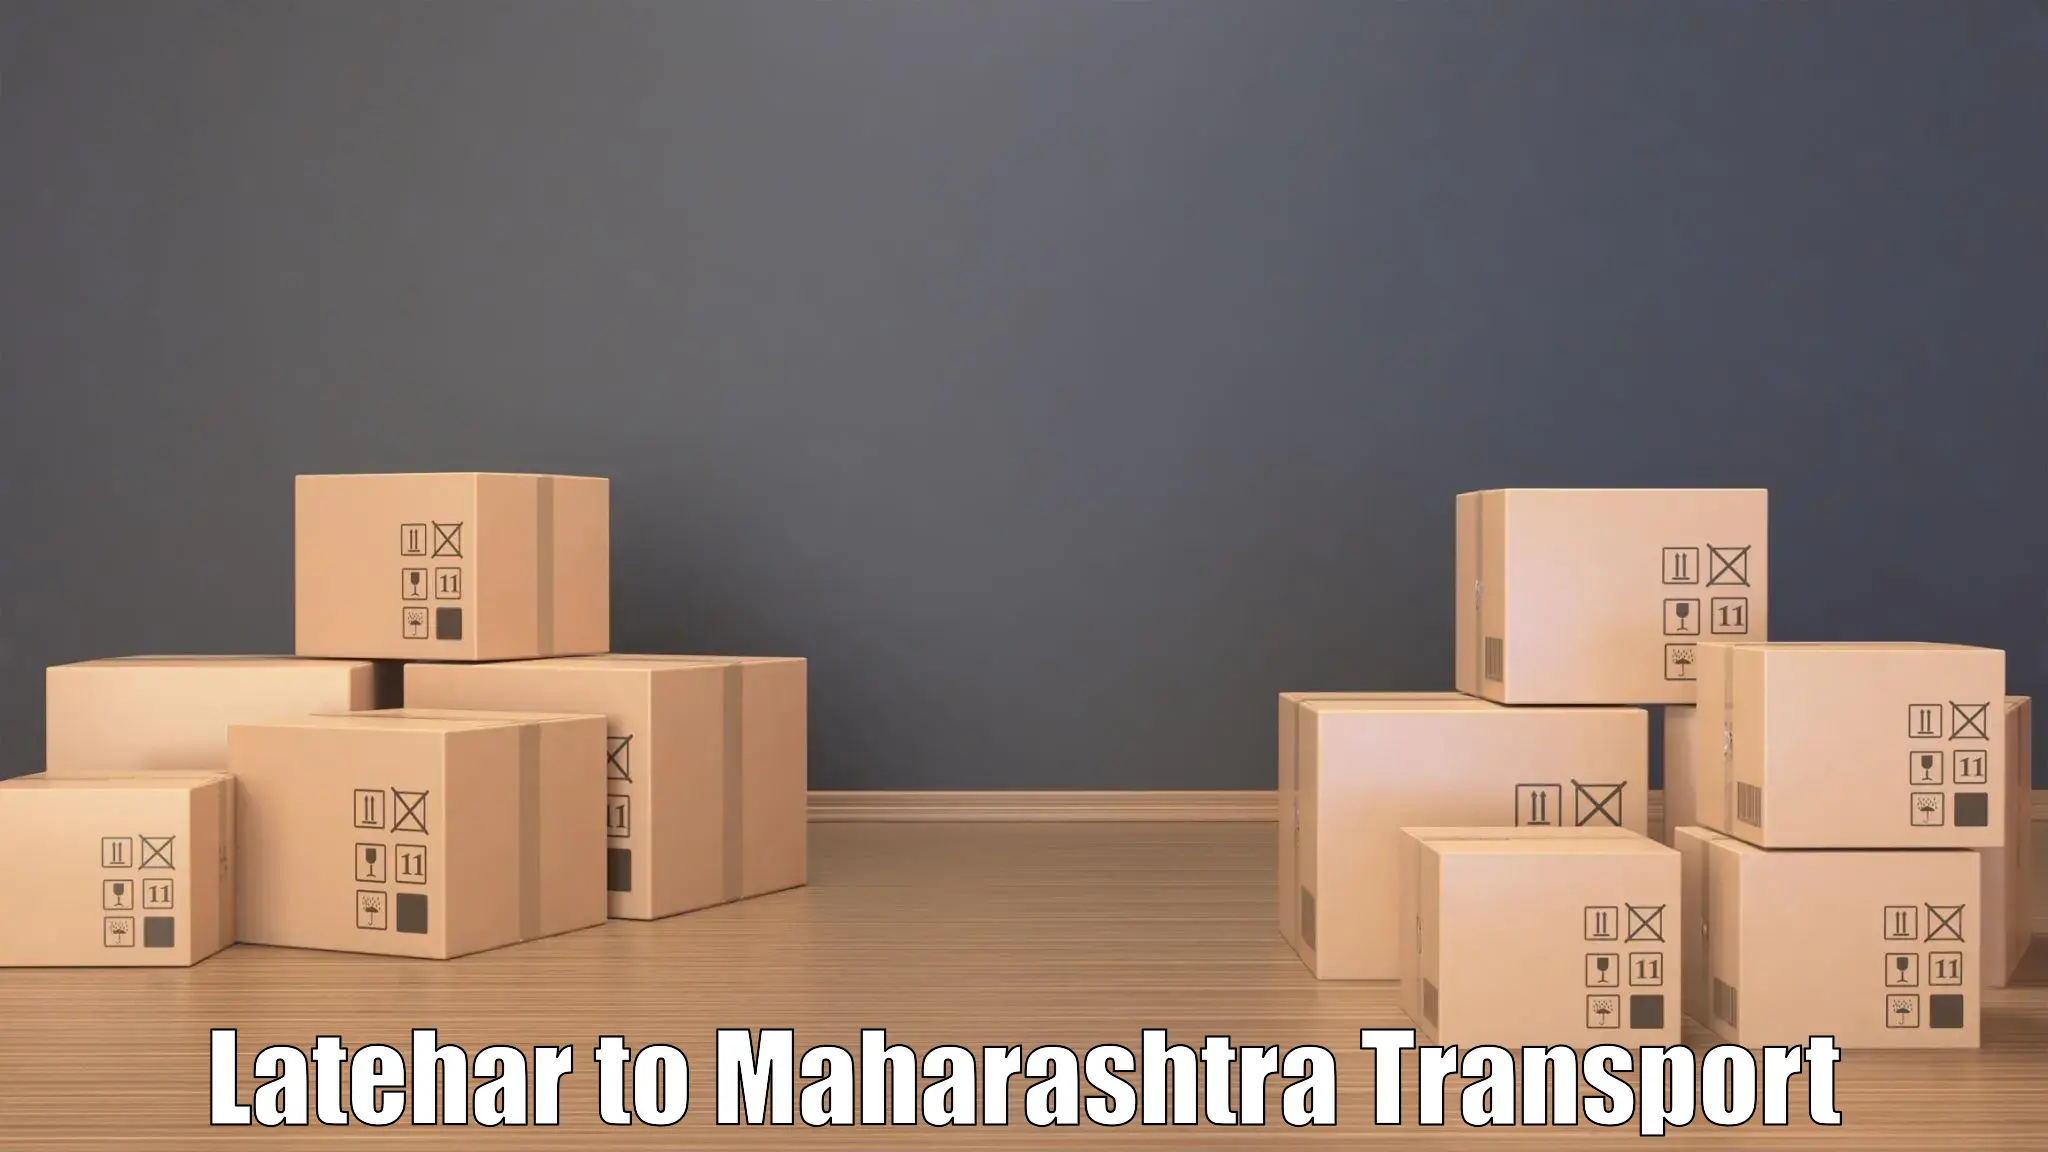 Truck transport companies in India in Latehar to Newasa